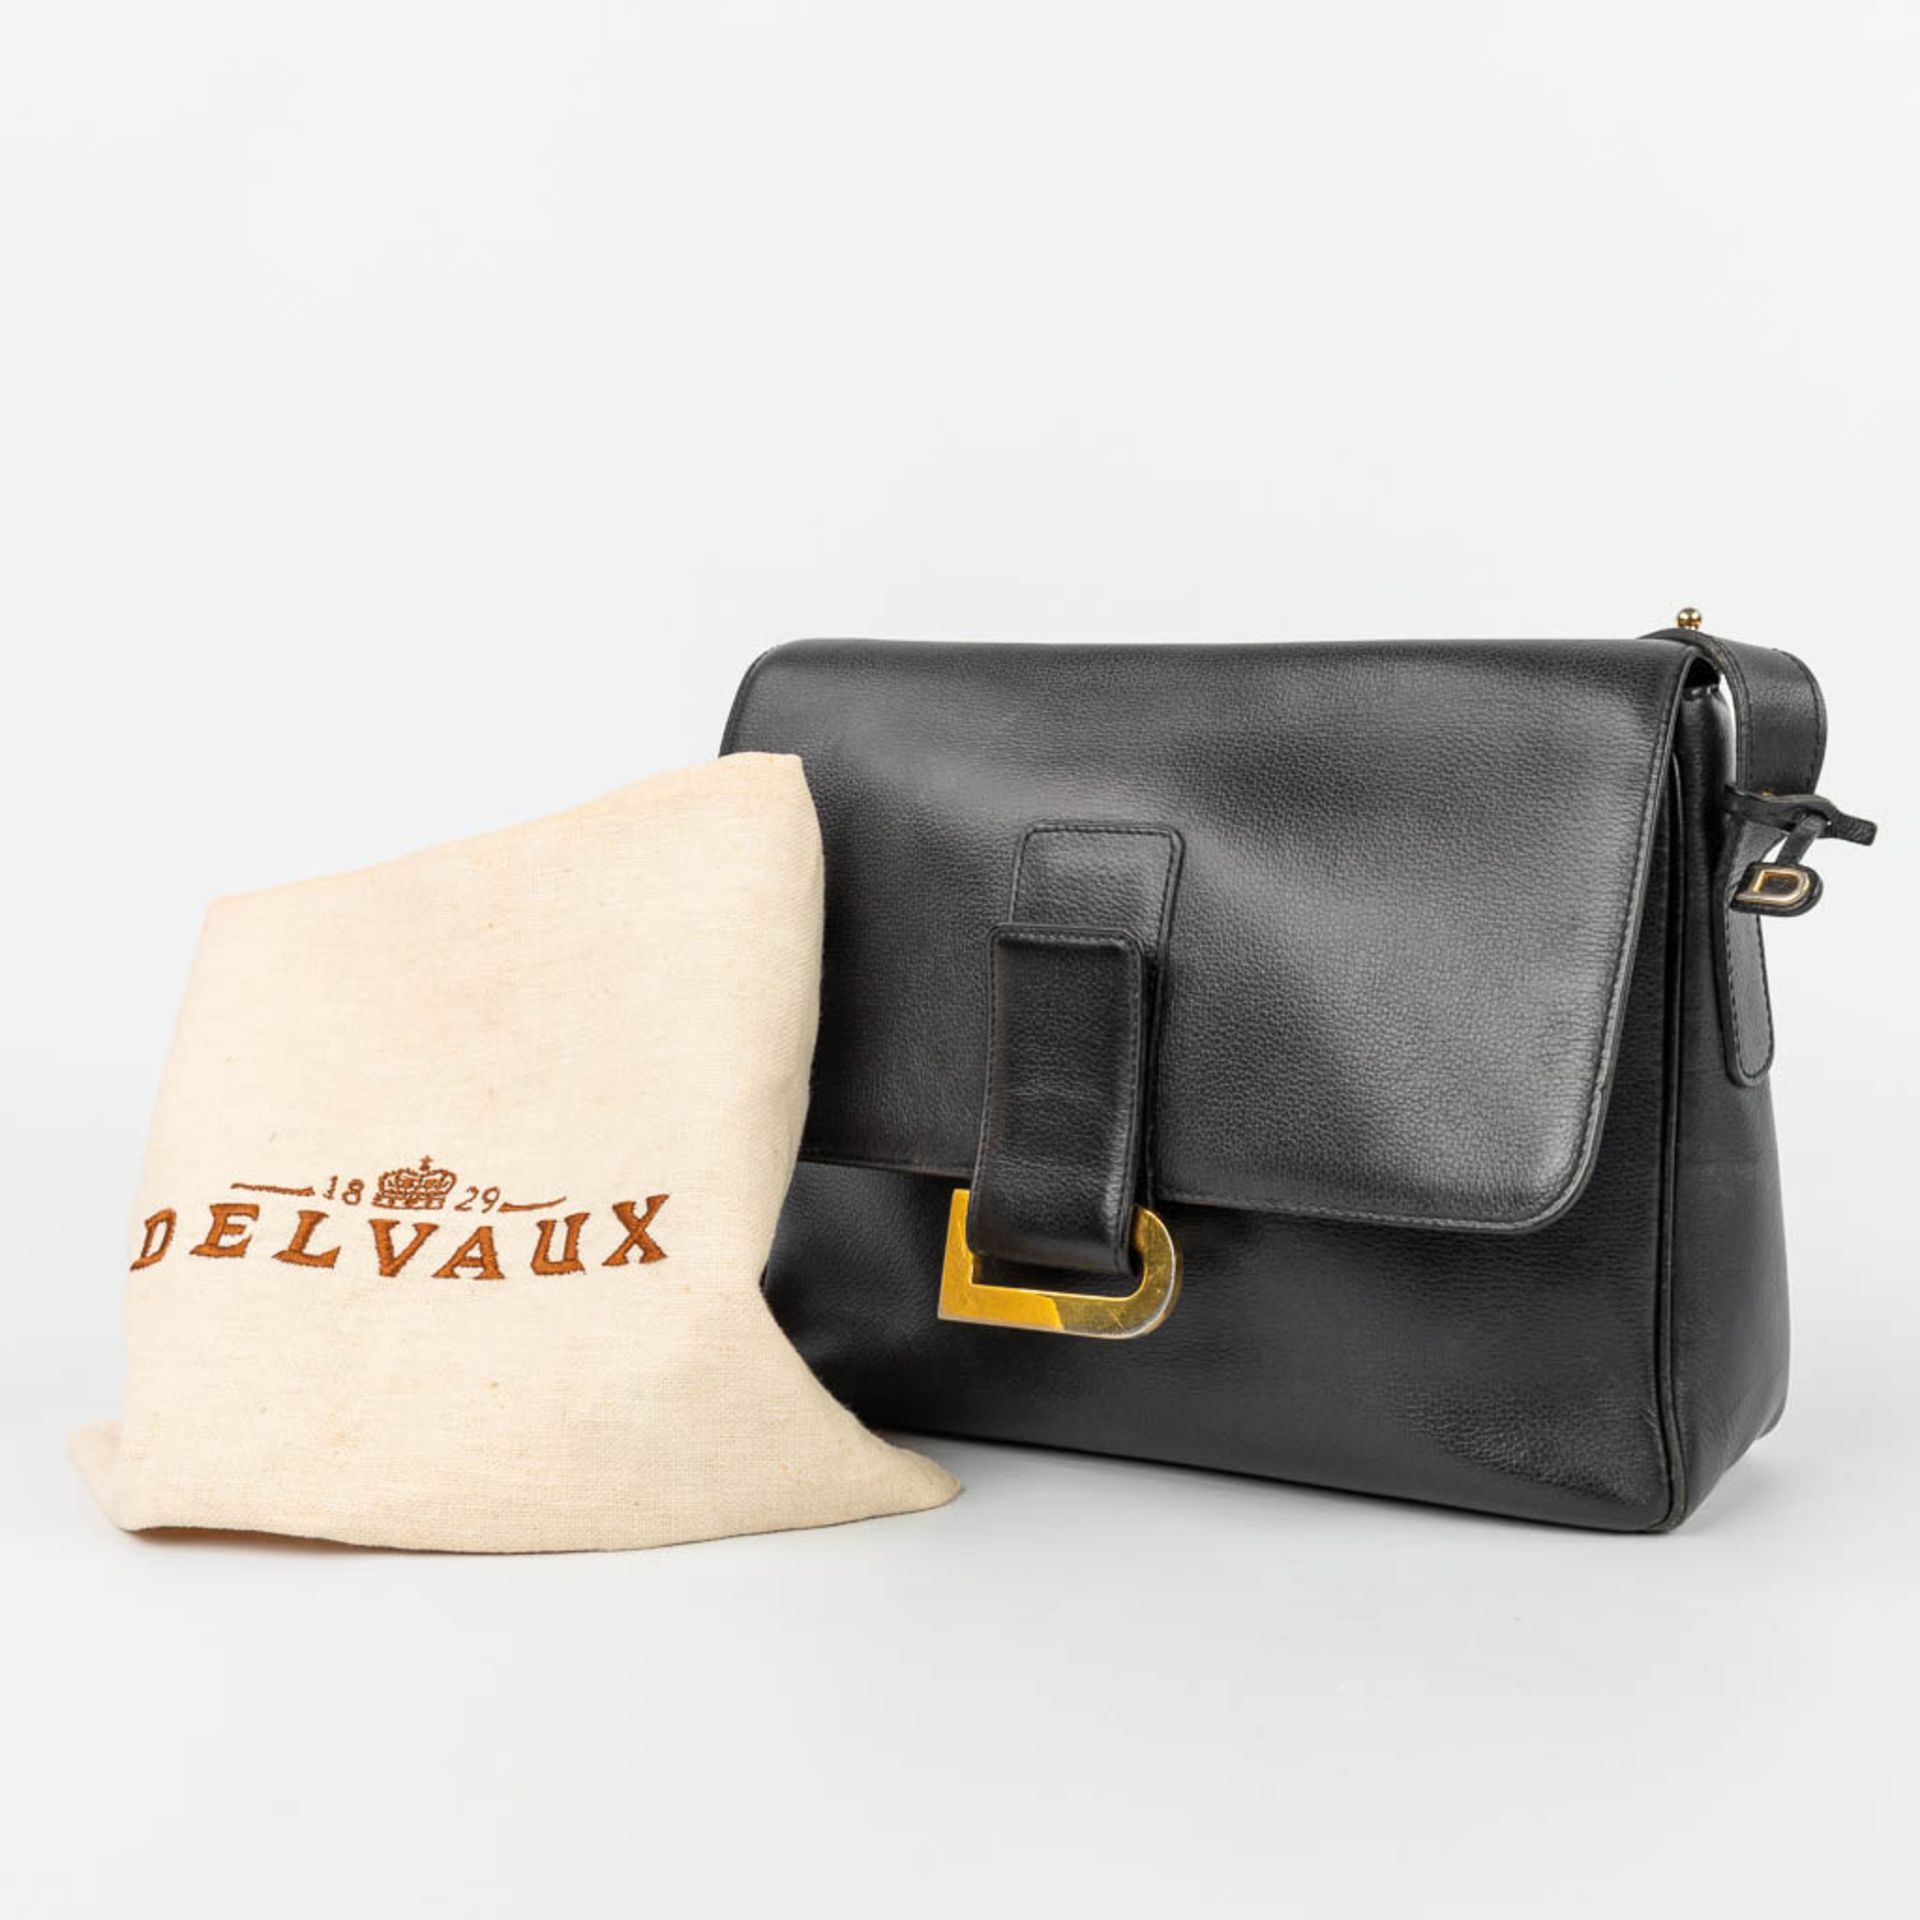 A purse made of black leather and marked Delvaux. (H:20cm)